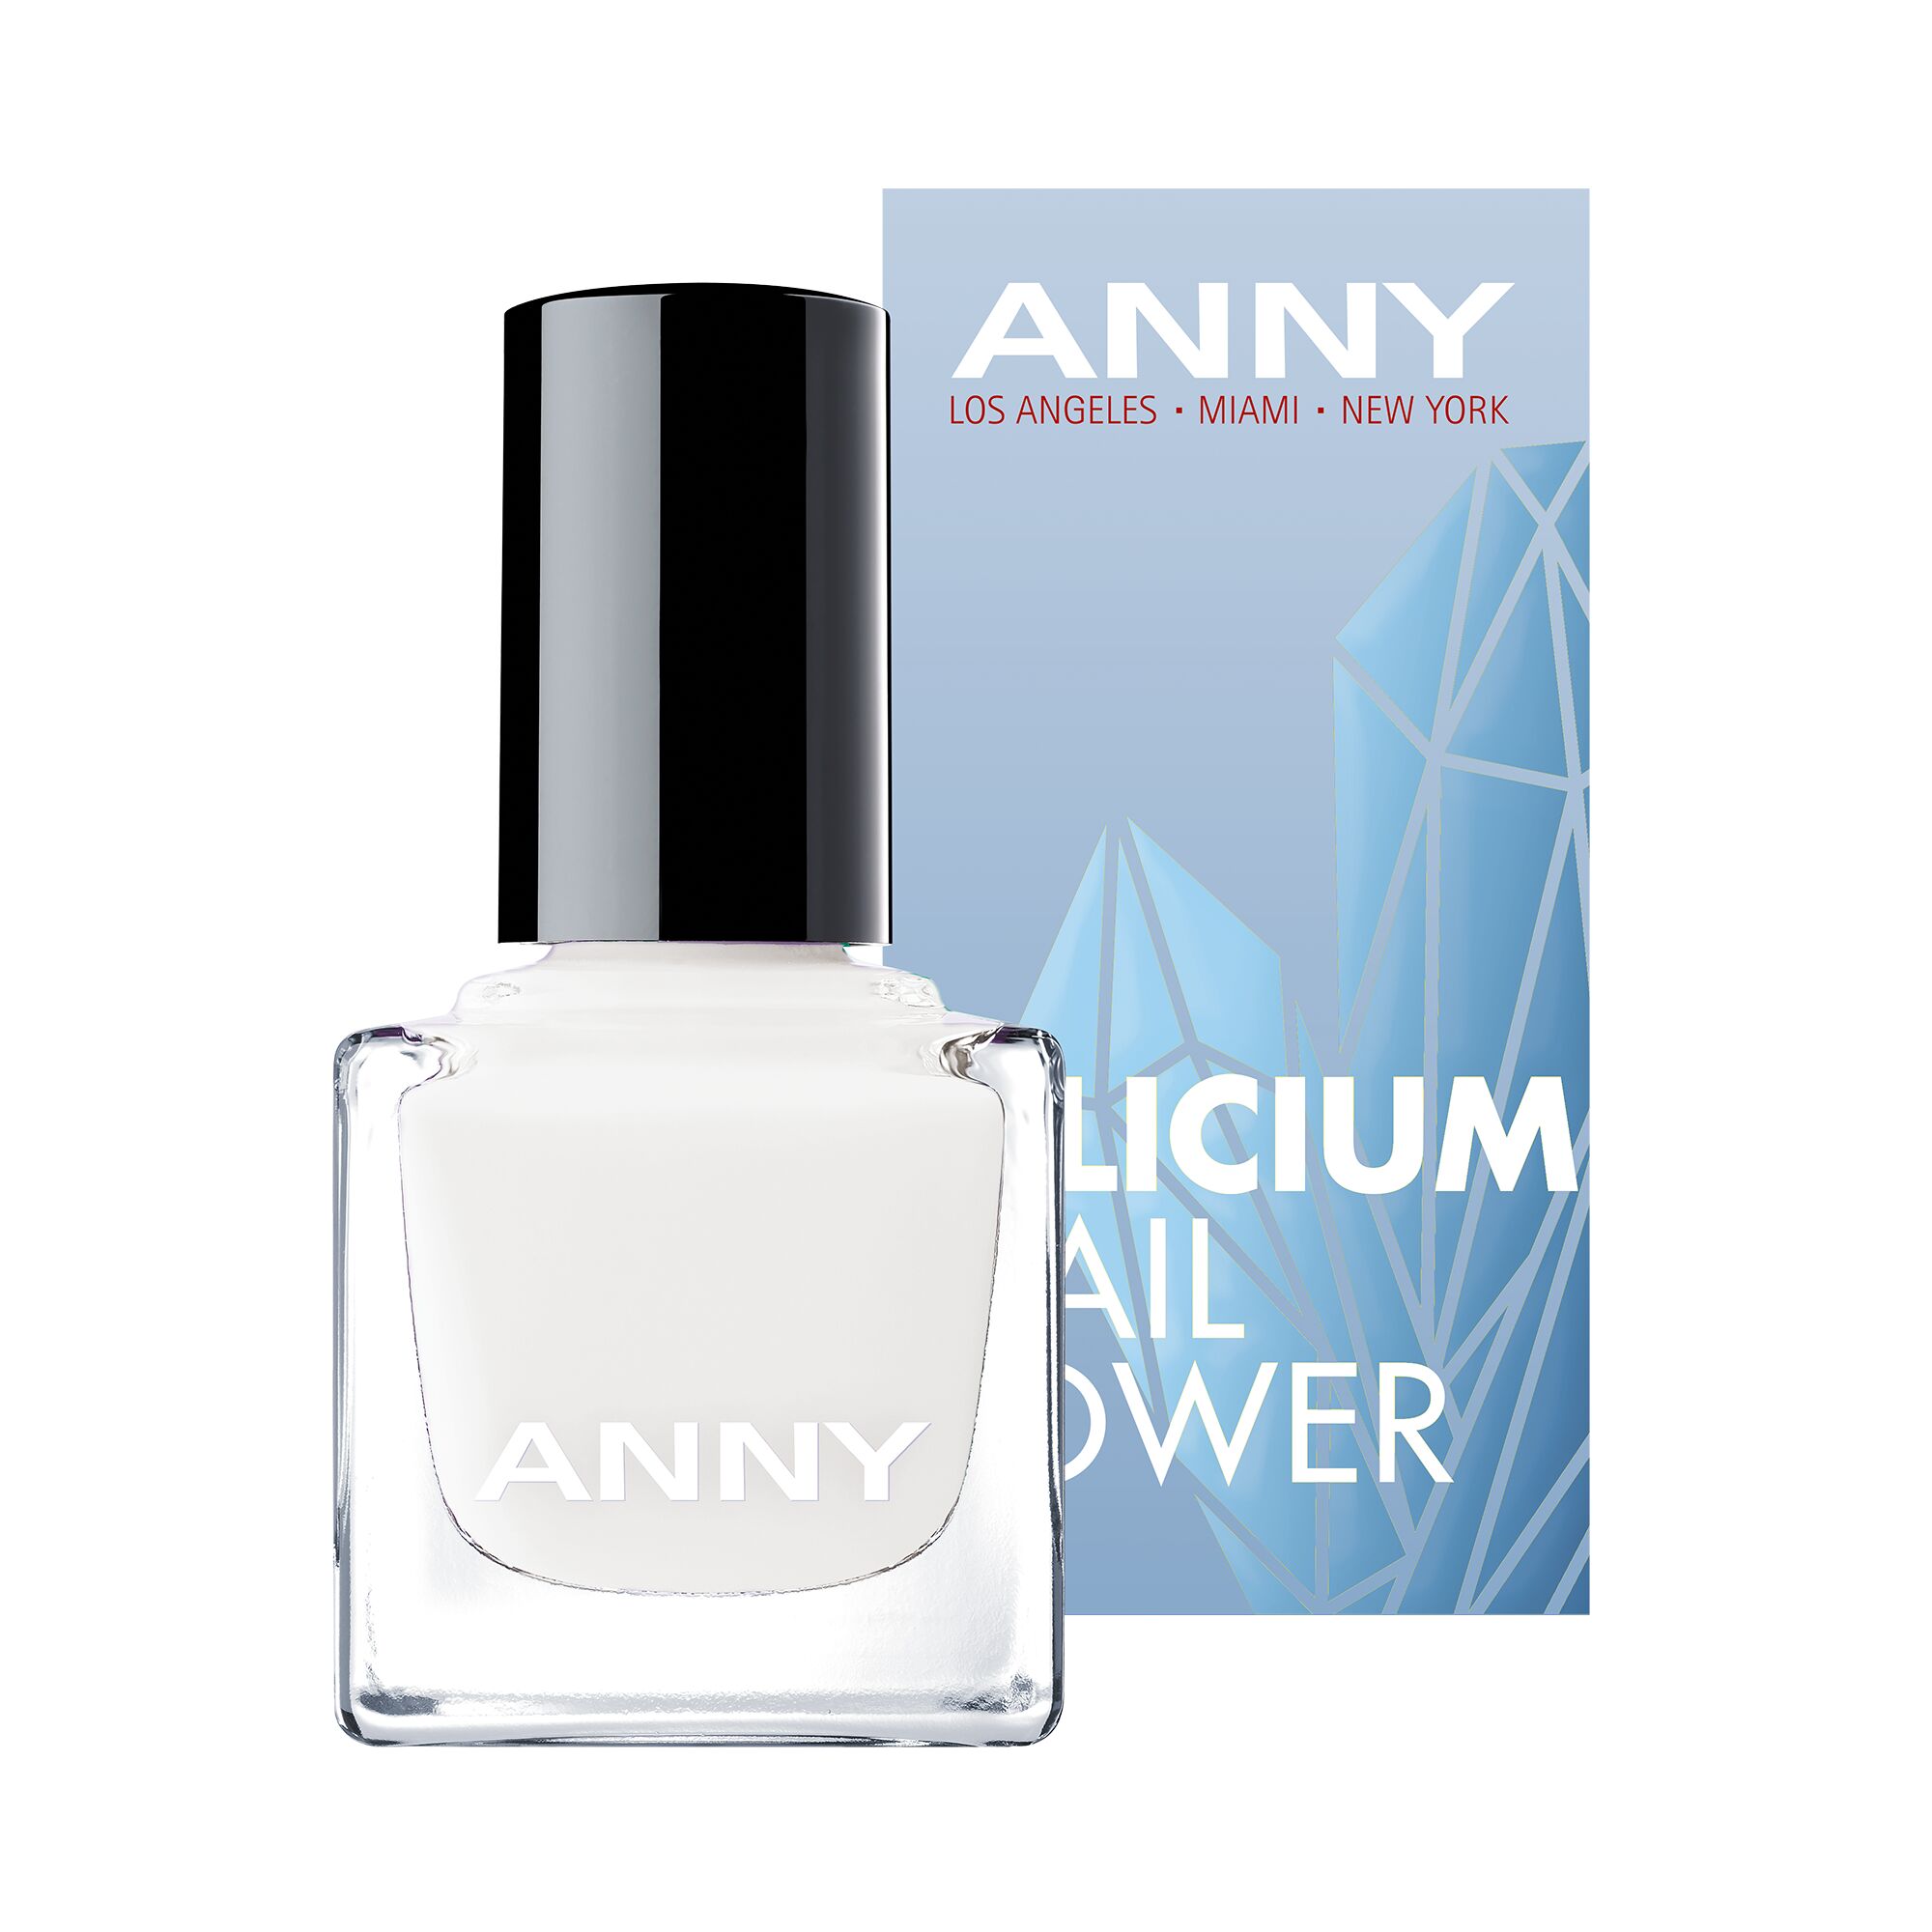 Anny Cosmetics - Now available: the NAIL GURU. Go to our... | Facebook